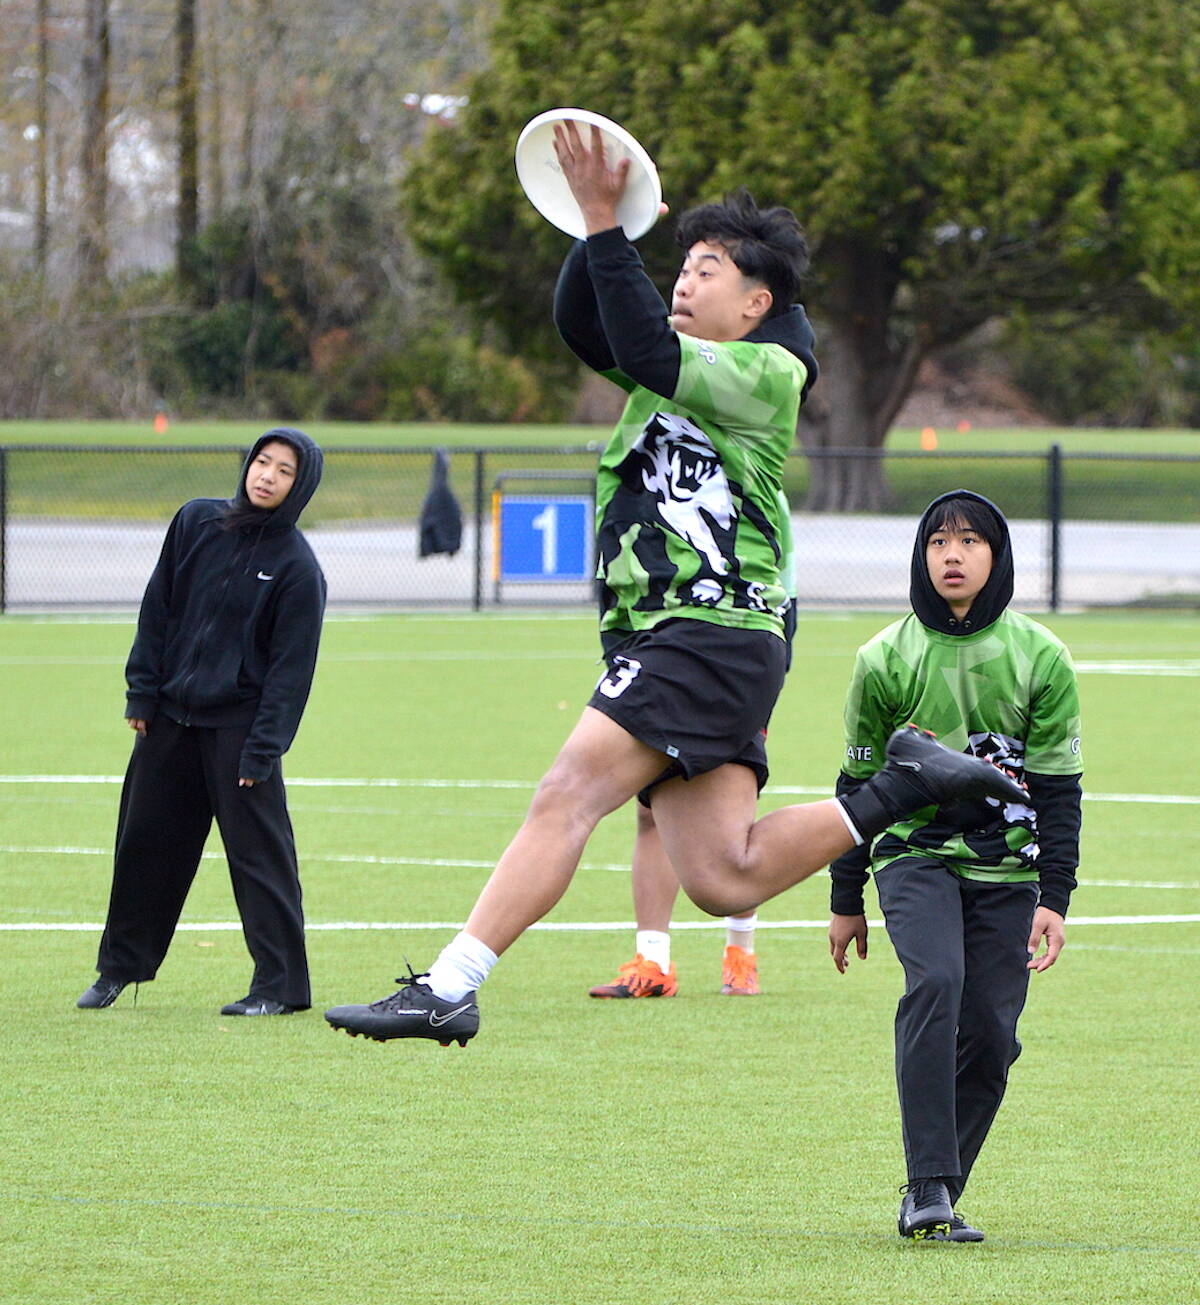 PHOTOS: A windy, cold day for ultimate in Surrey as the disc sport takes  off at schools in B.C. - Surrey Now-Leader